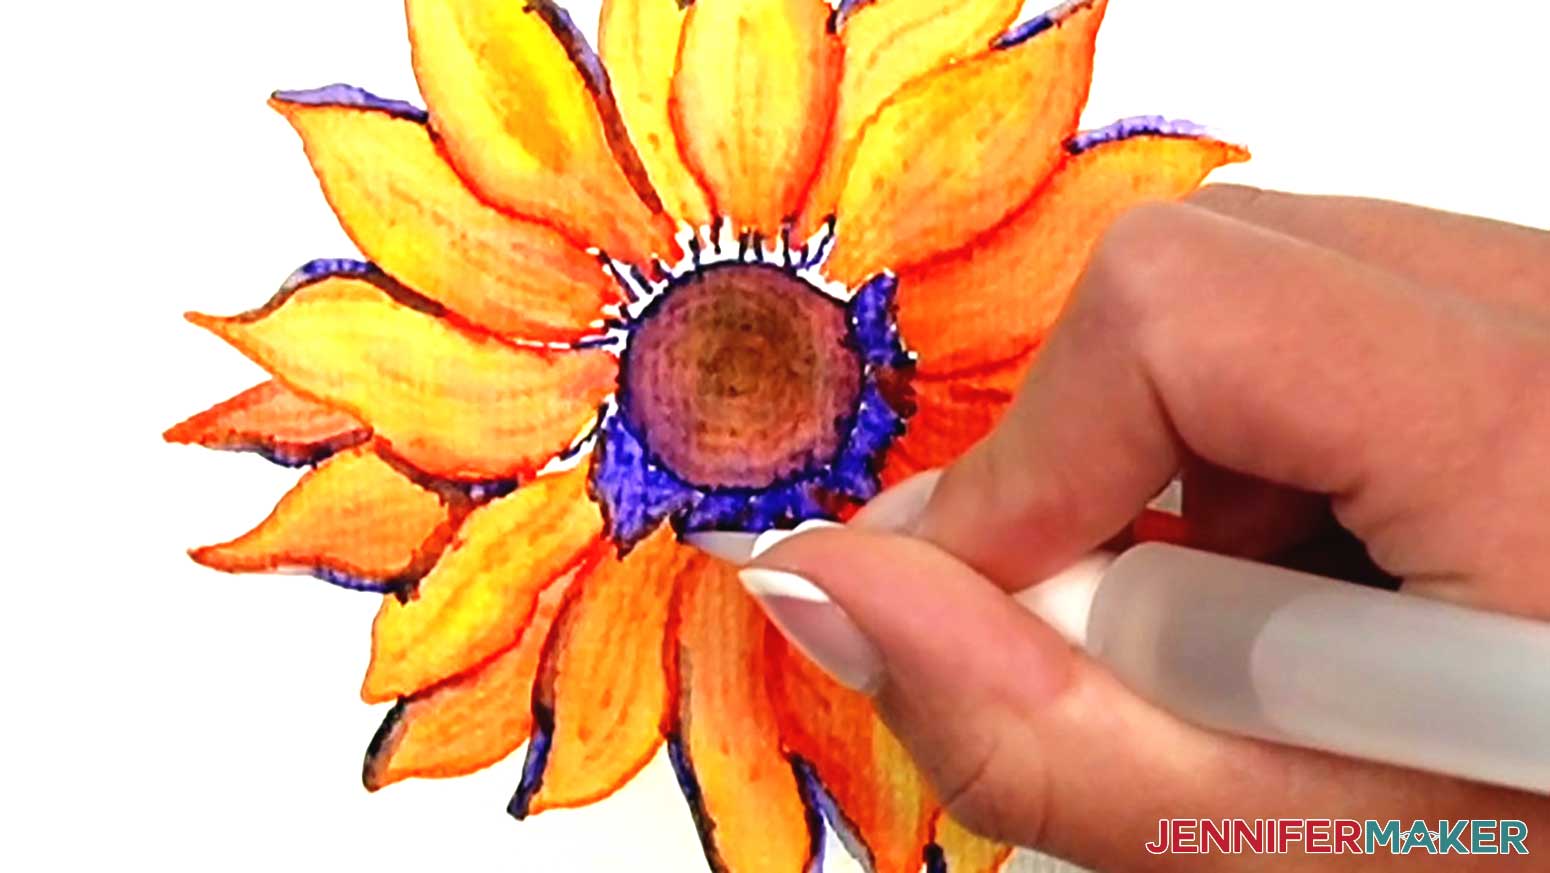 Draw the blue color from the center onto the petals of the watercolor sunflower to create shading.